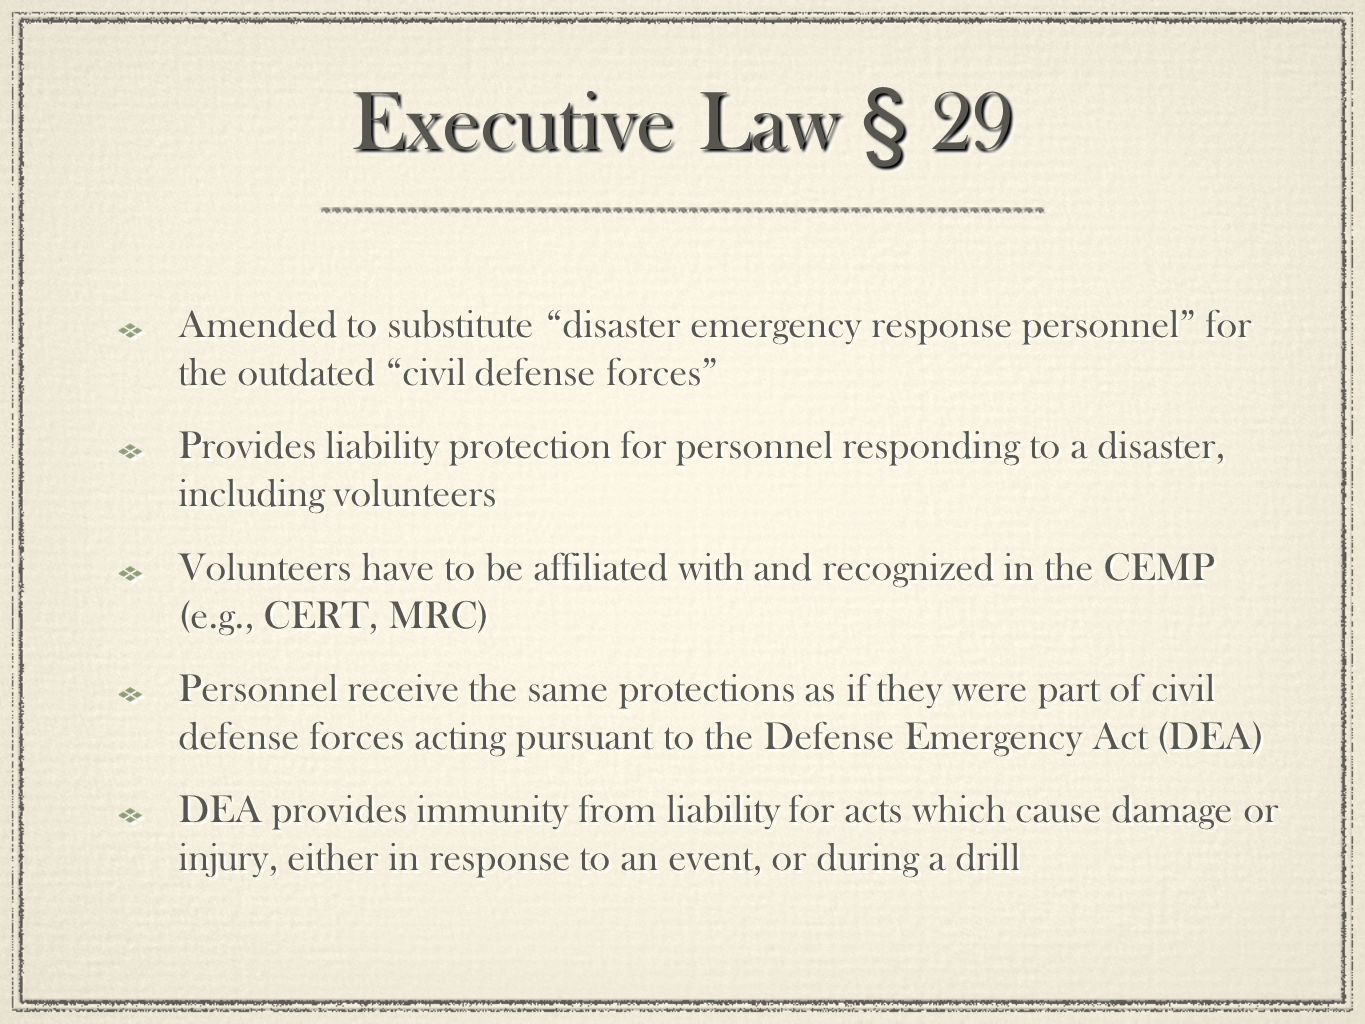 Executive Law § 29 Amended to substitute disaster emergency response personnel for the outdated civil defense forces Provides liability protection for personnel responding to a disaster, including volunteers Volunteers have to be affiliated with and recognized in the CEMP (e.g., CERT, MRC) Personnel receive the same protections as if they were part of civil defense forces acting pursuant to the Defense Emergency Act (DEA) DEA provides immunity from liability for acts which cause damage or injury, either in response to an event, or during a drill Amended to substitute disaster emergency response personnel for the outdated civil defense forces Provides liability protection for personnel responding to a disaster, including volunteers Volunteers have to be affiliated with and recognized in the CEMP (e.g., CERT, MRC) Personnel receive the same protections as if they were part of civil defense forces acting pursuant to the Defense Emergency Act (DEA) DEA provides immunity from liability for acts which cause damage or injury, either in response to an event, or during a drill